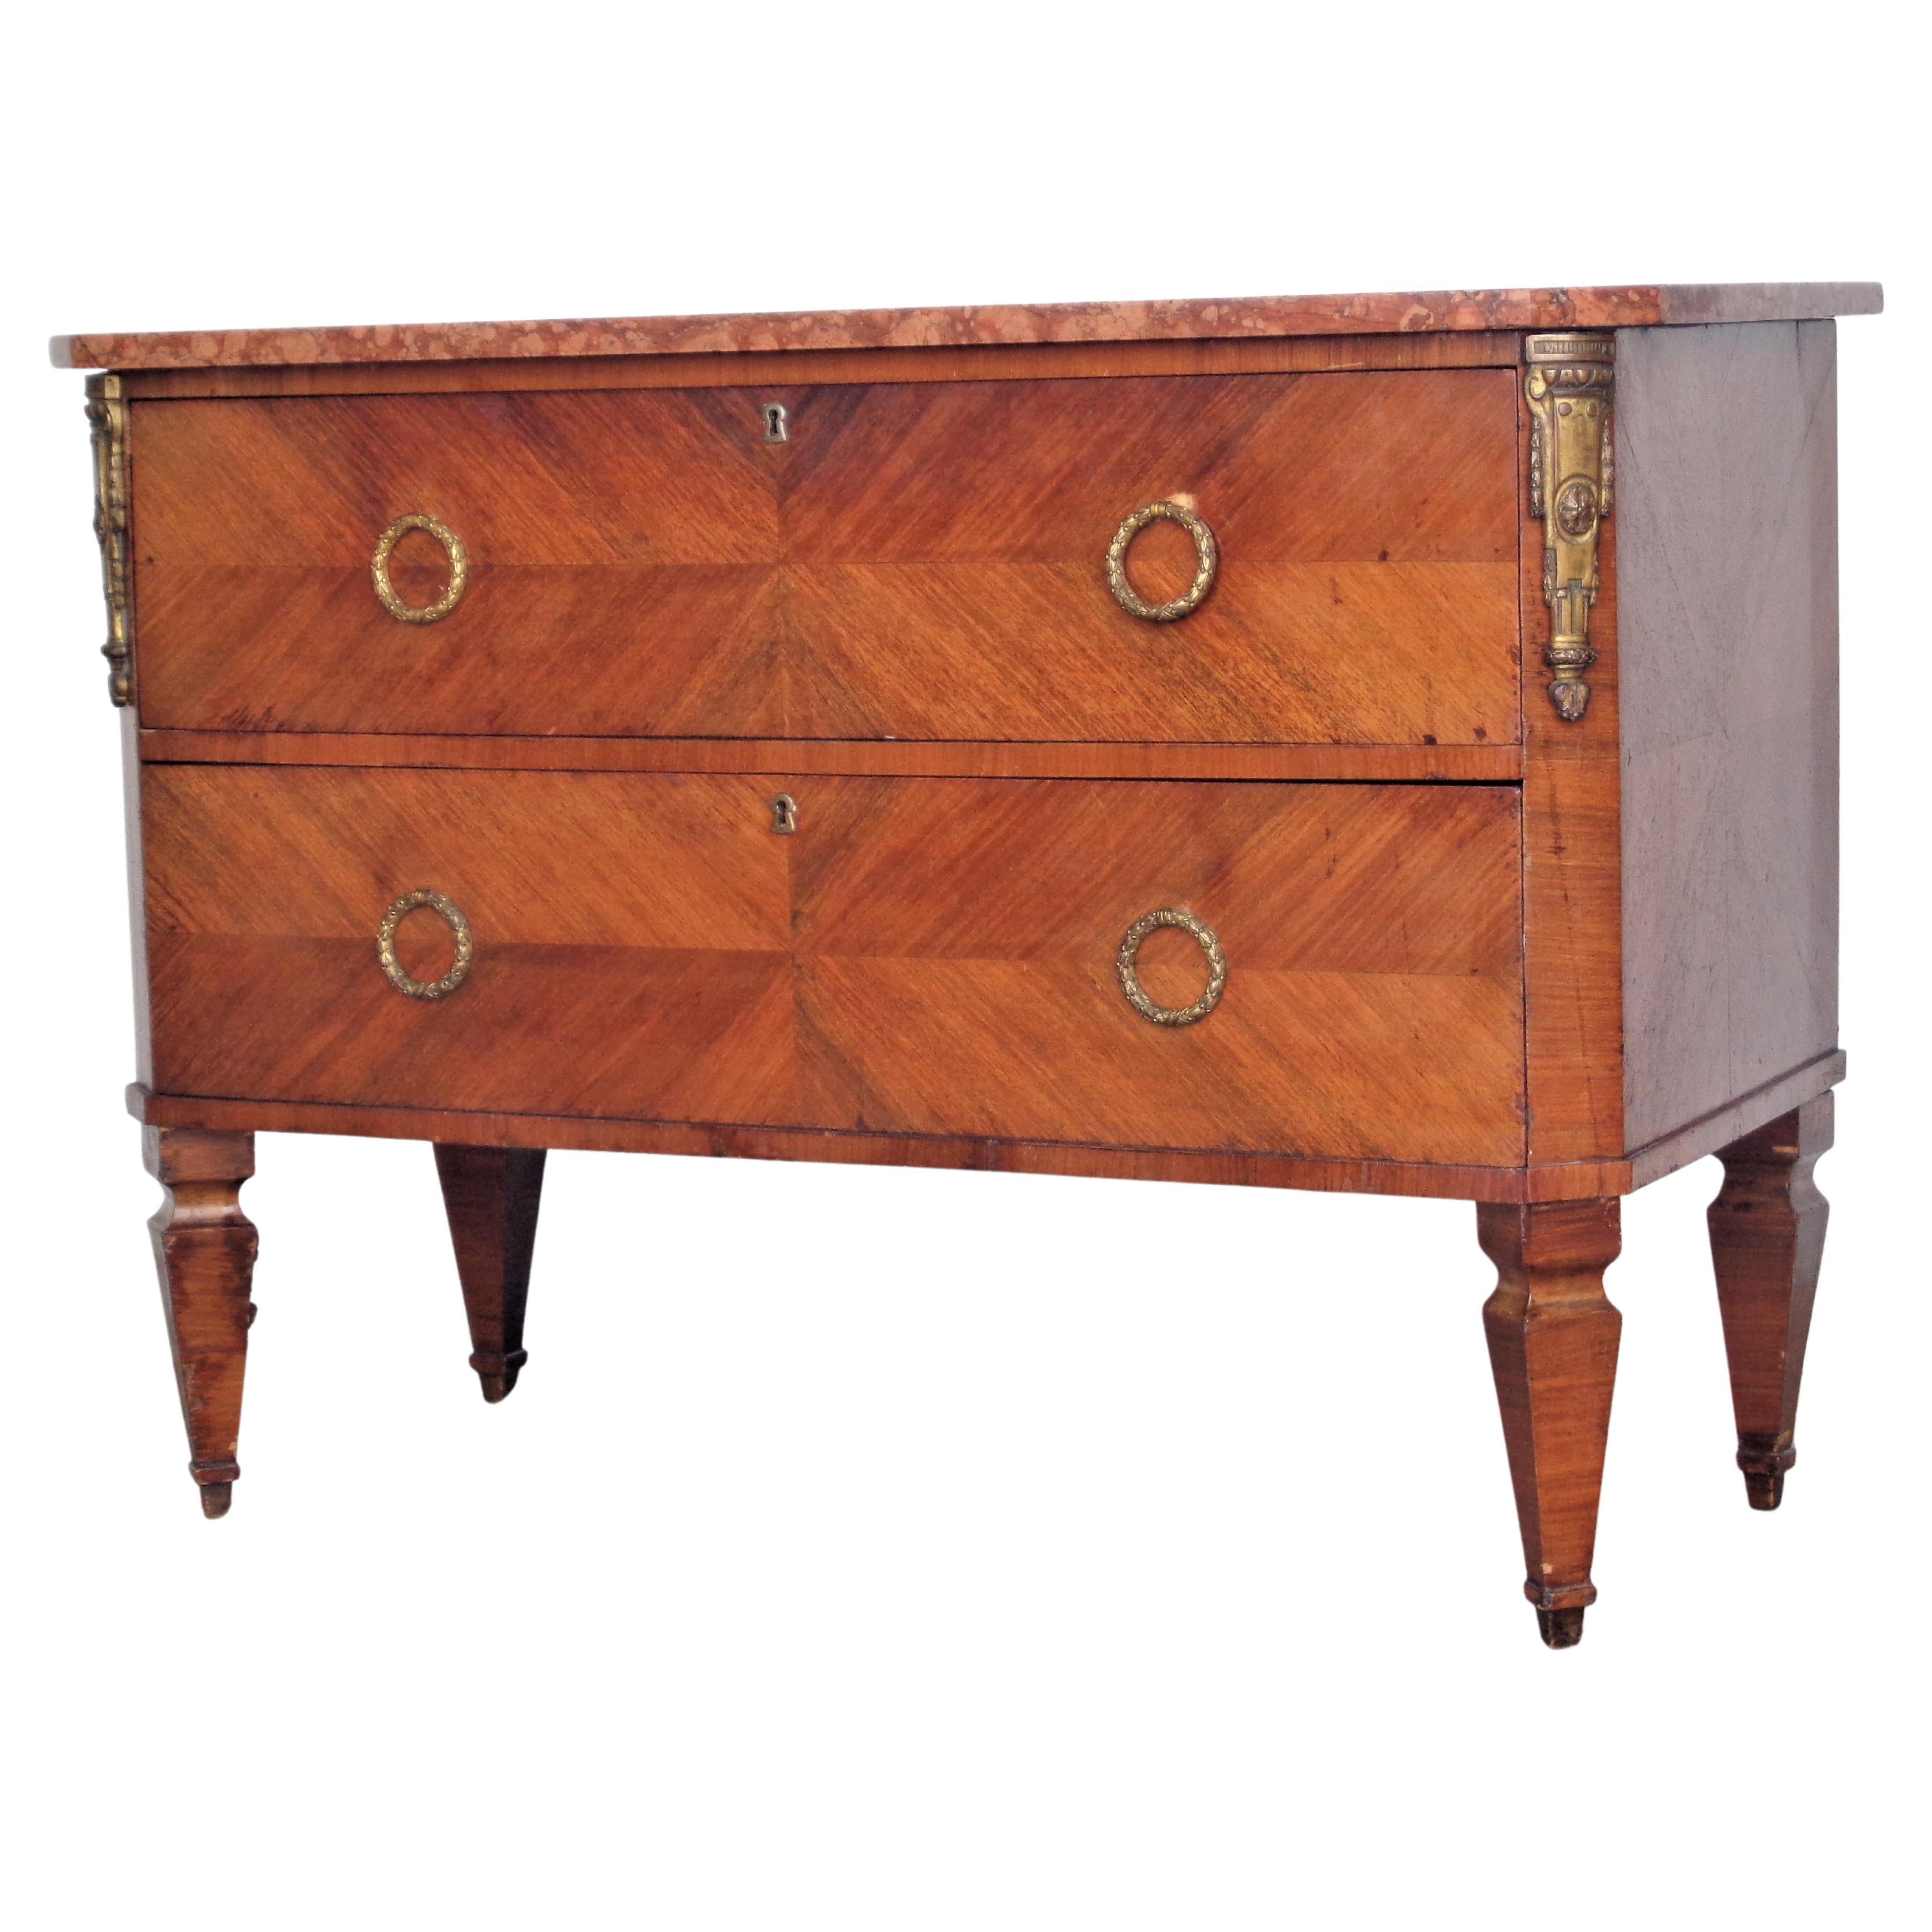 19th Century Louis XVI Style Neoclassical Commode